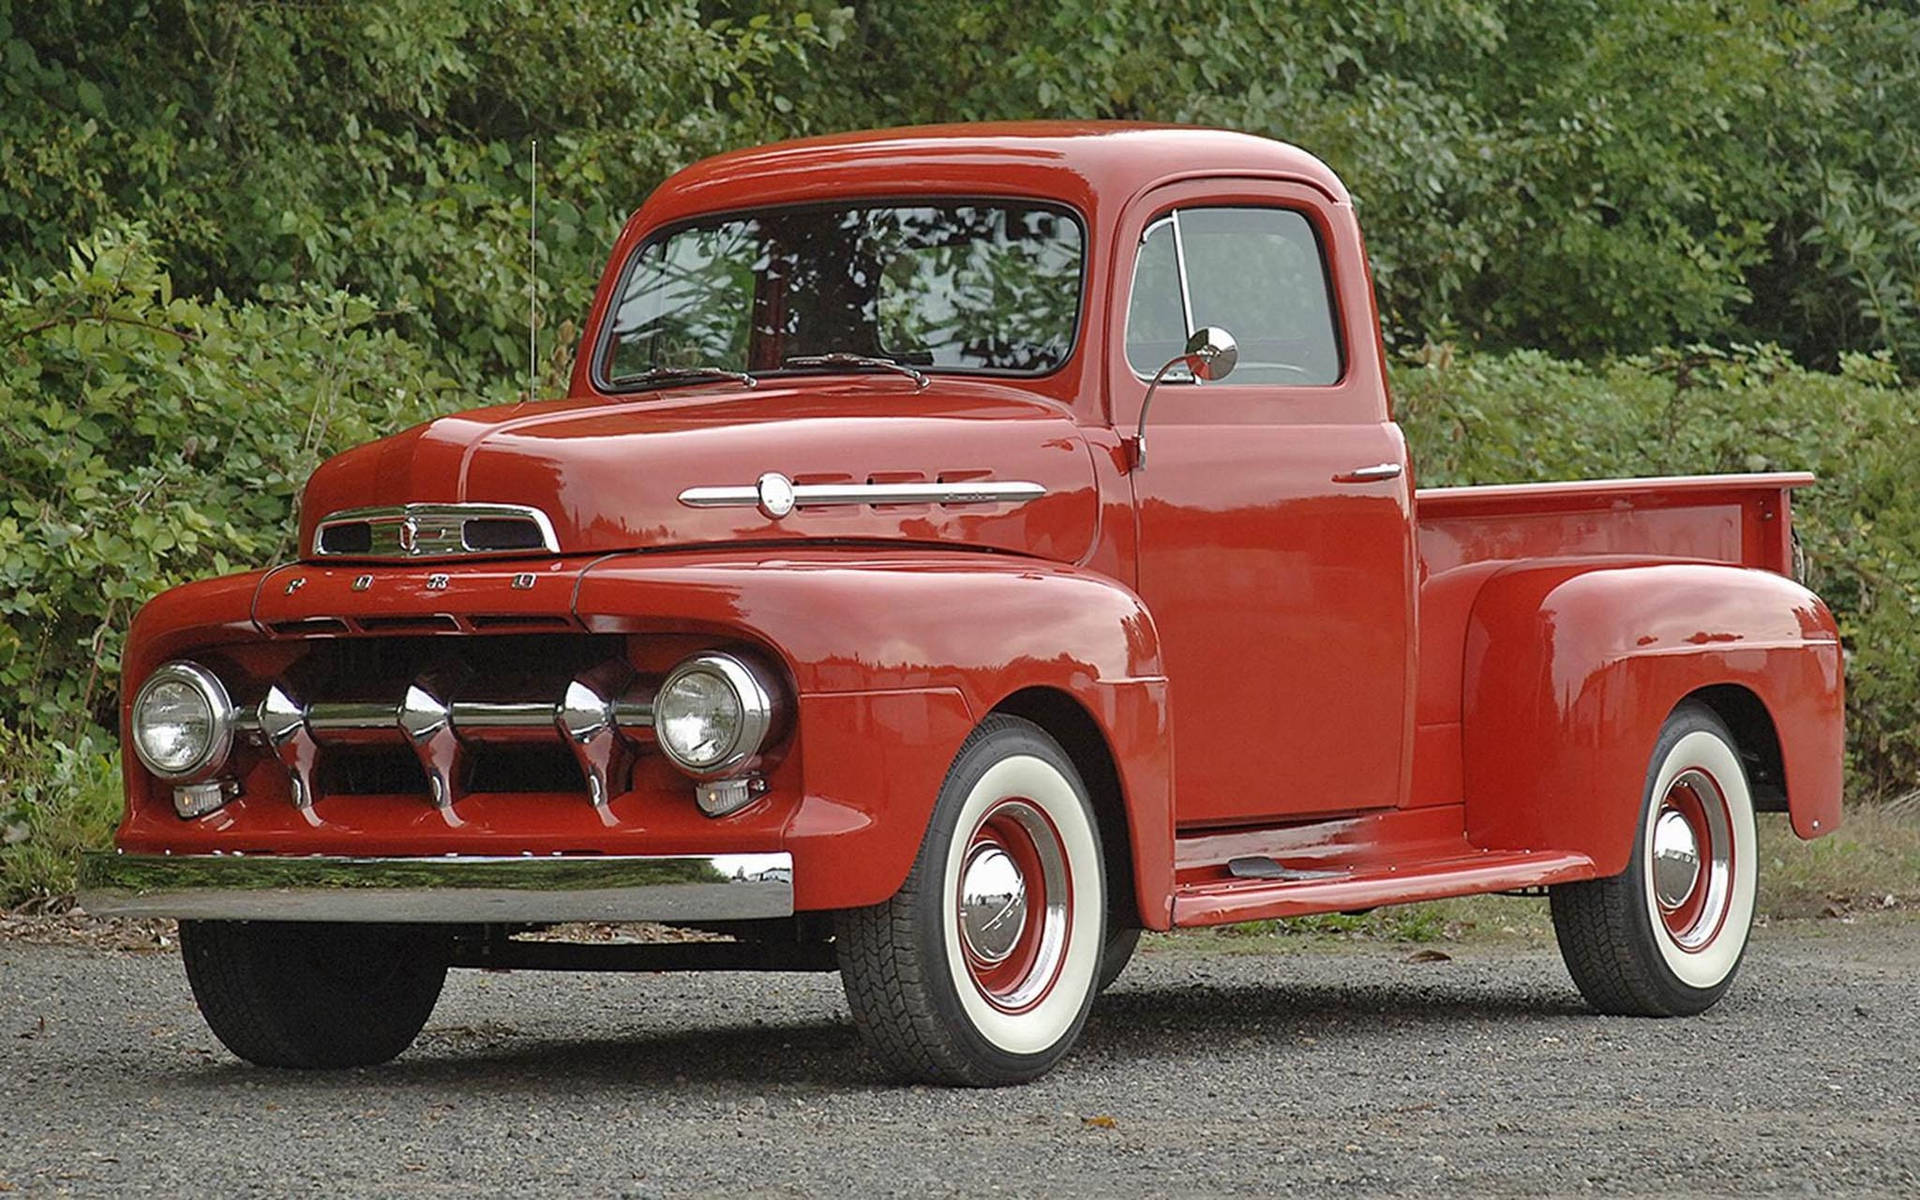 First Generation Old Ford Truck